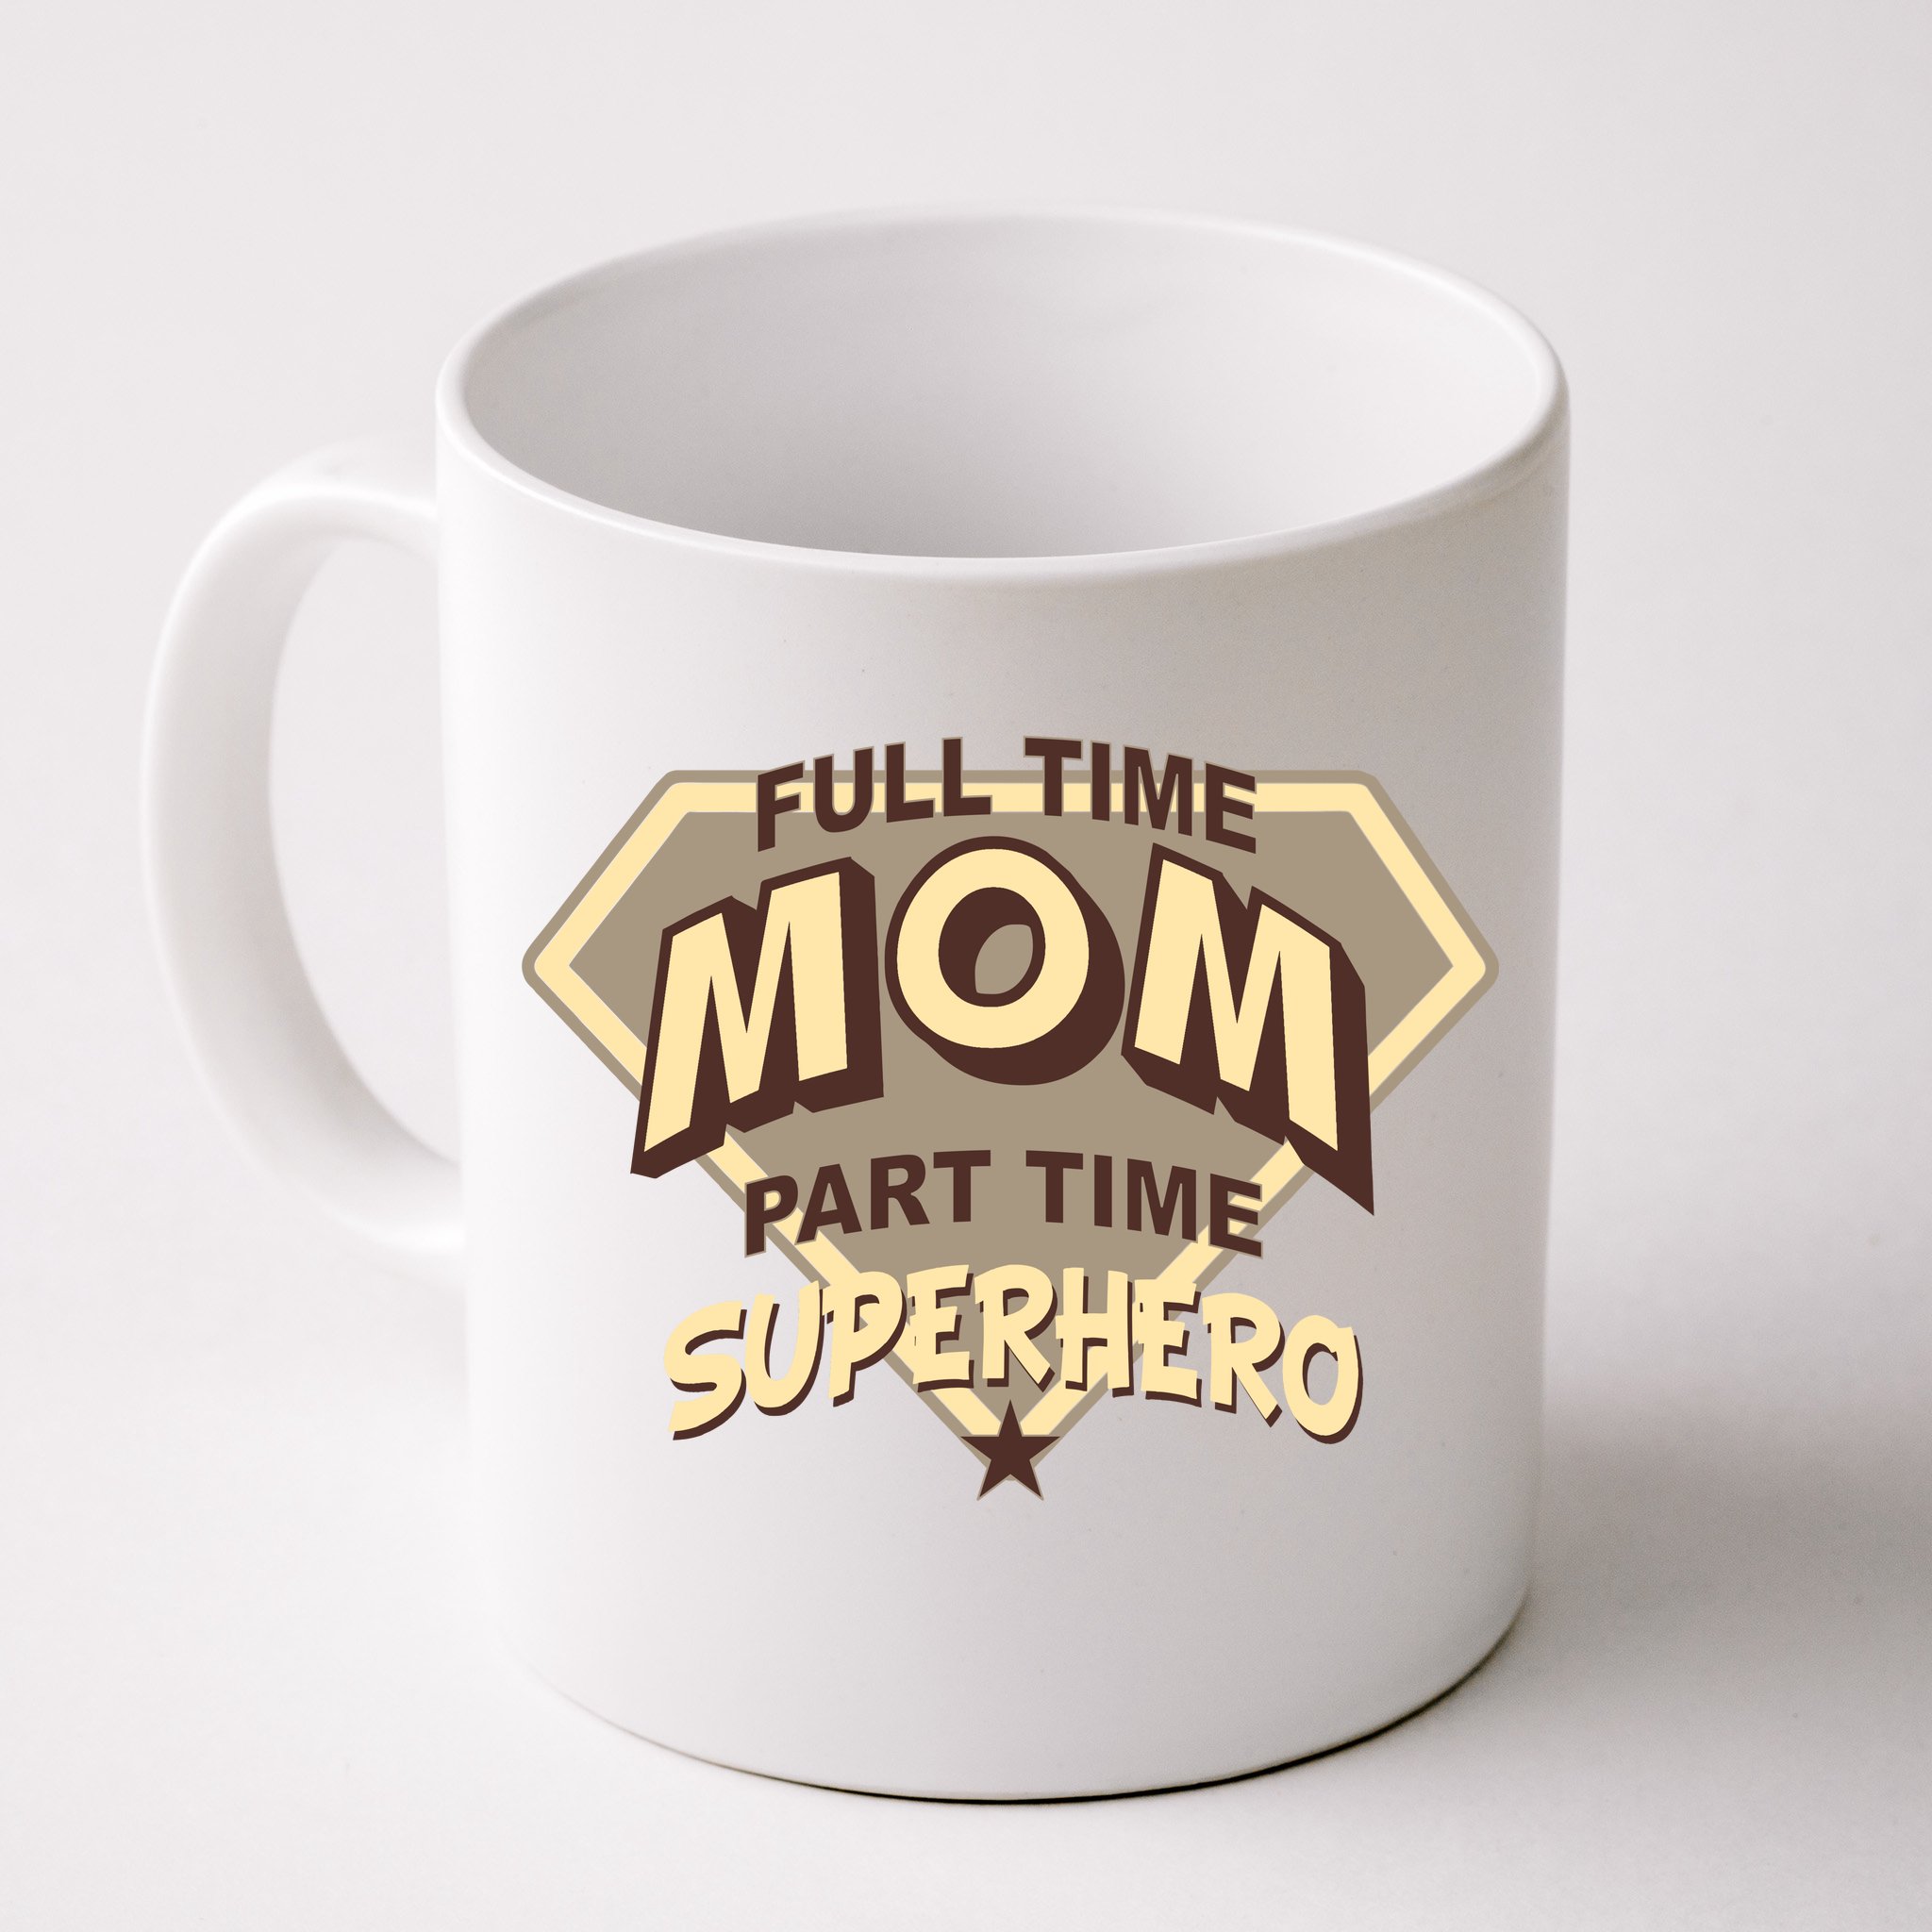 https://images3.teeshirtpalace.com/images/productImages/full-time-mom-part-time-superhero--white-cfm-front.jpg